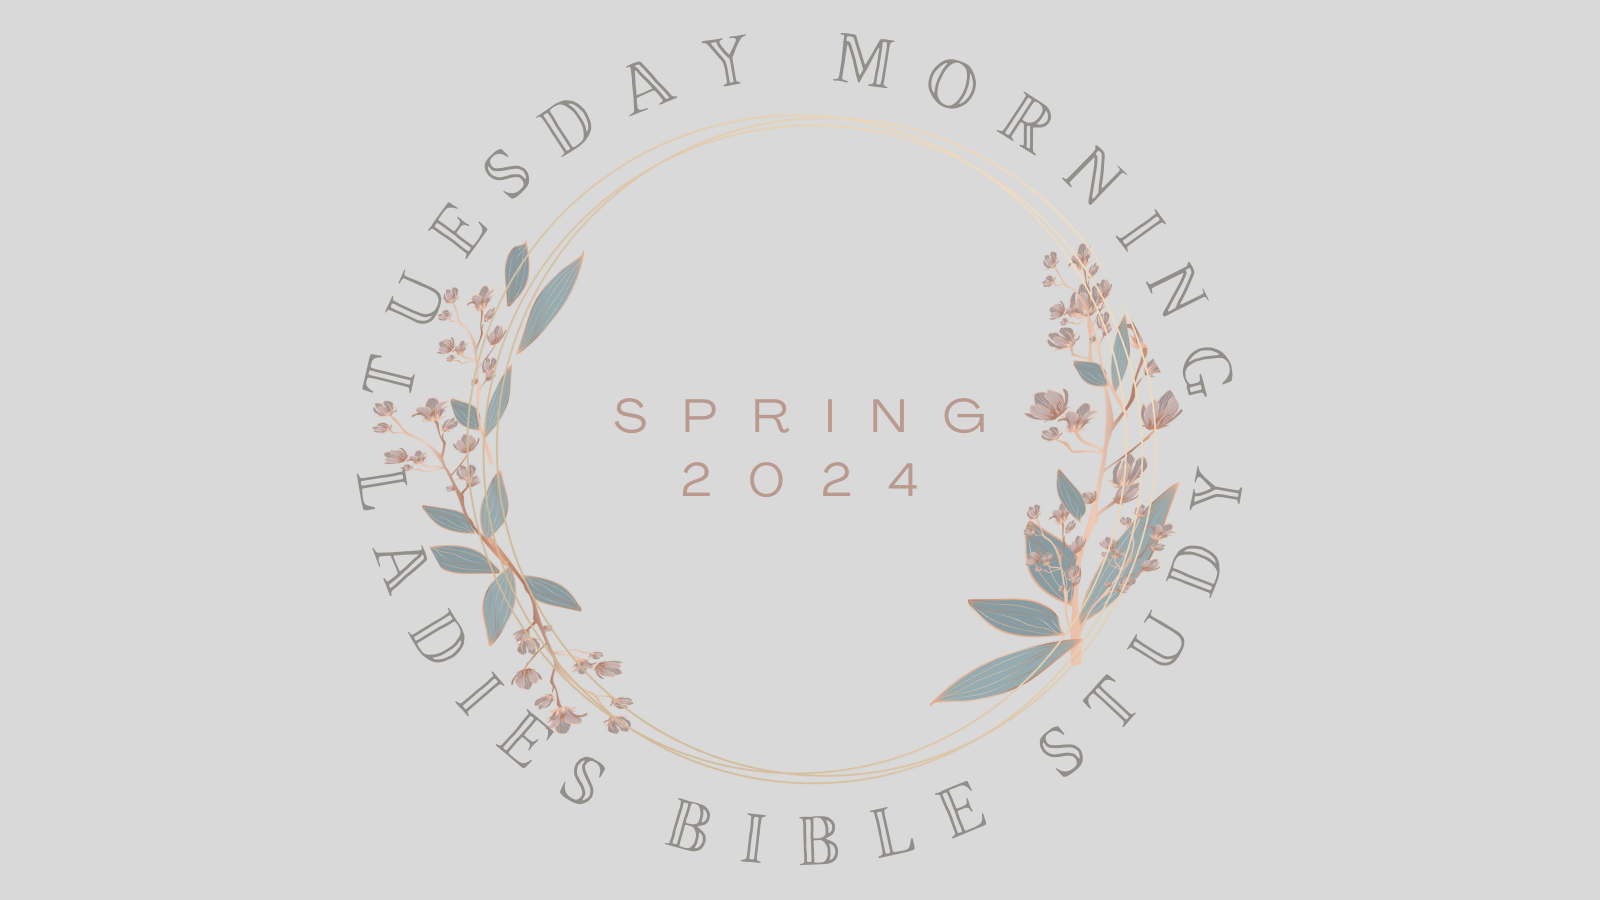 Tuesday Morning Ladies Bible Study spring 24 (1600 × 900 px) image